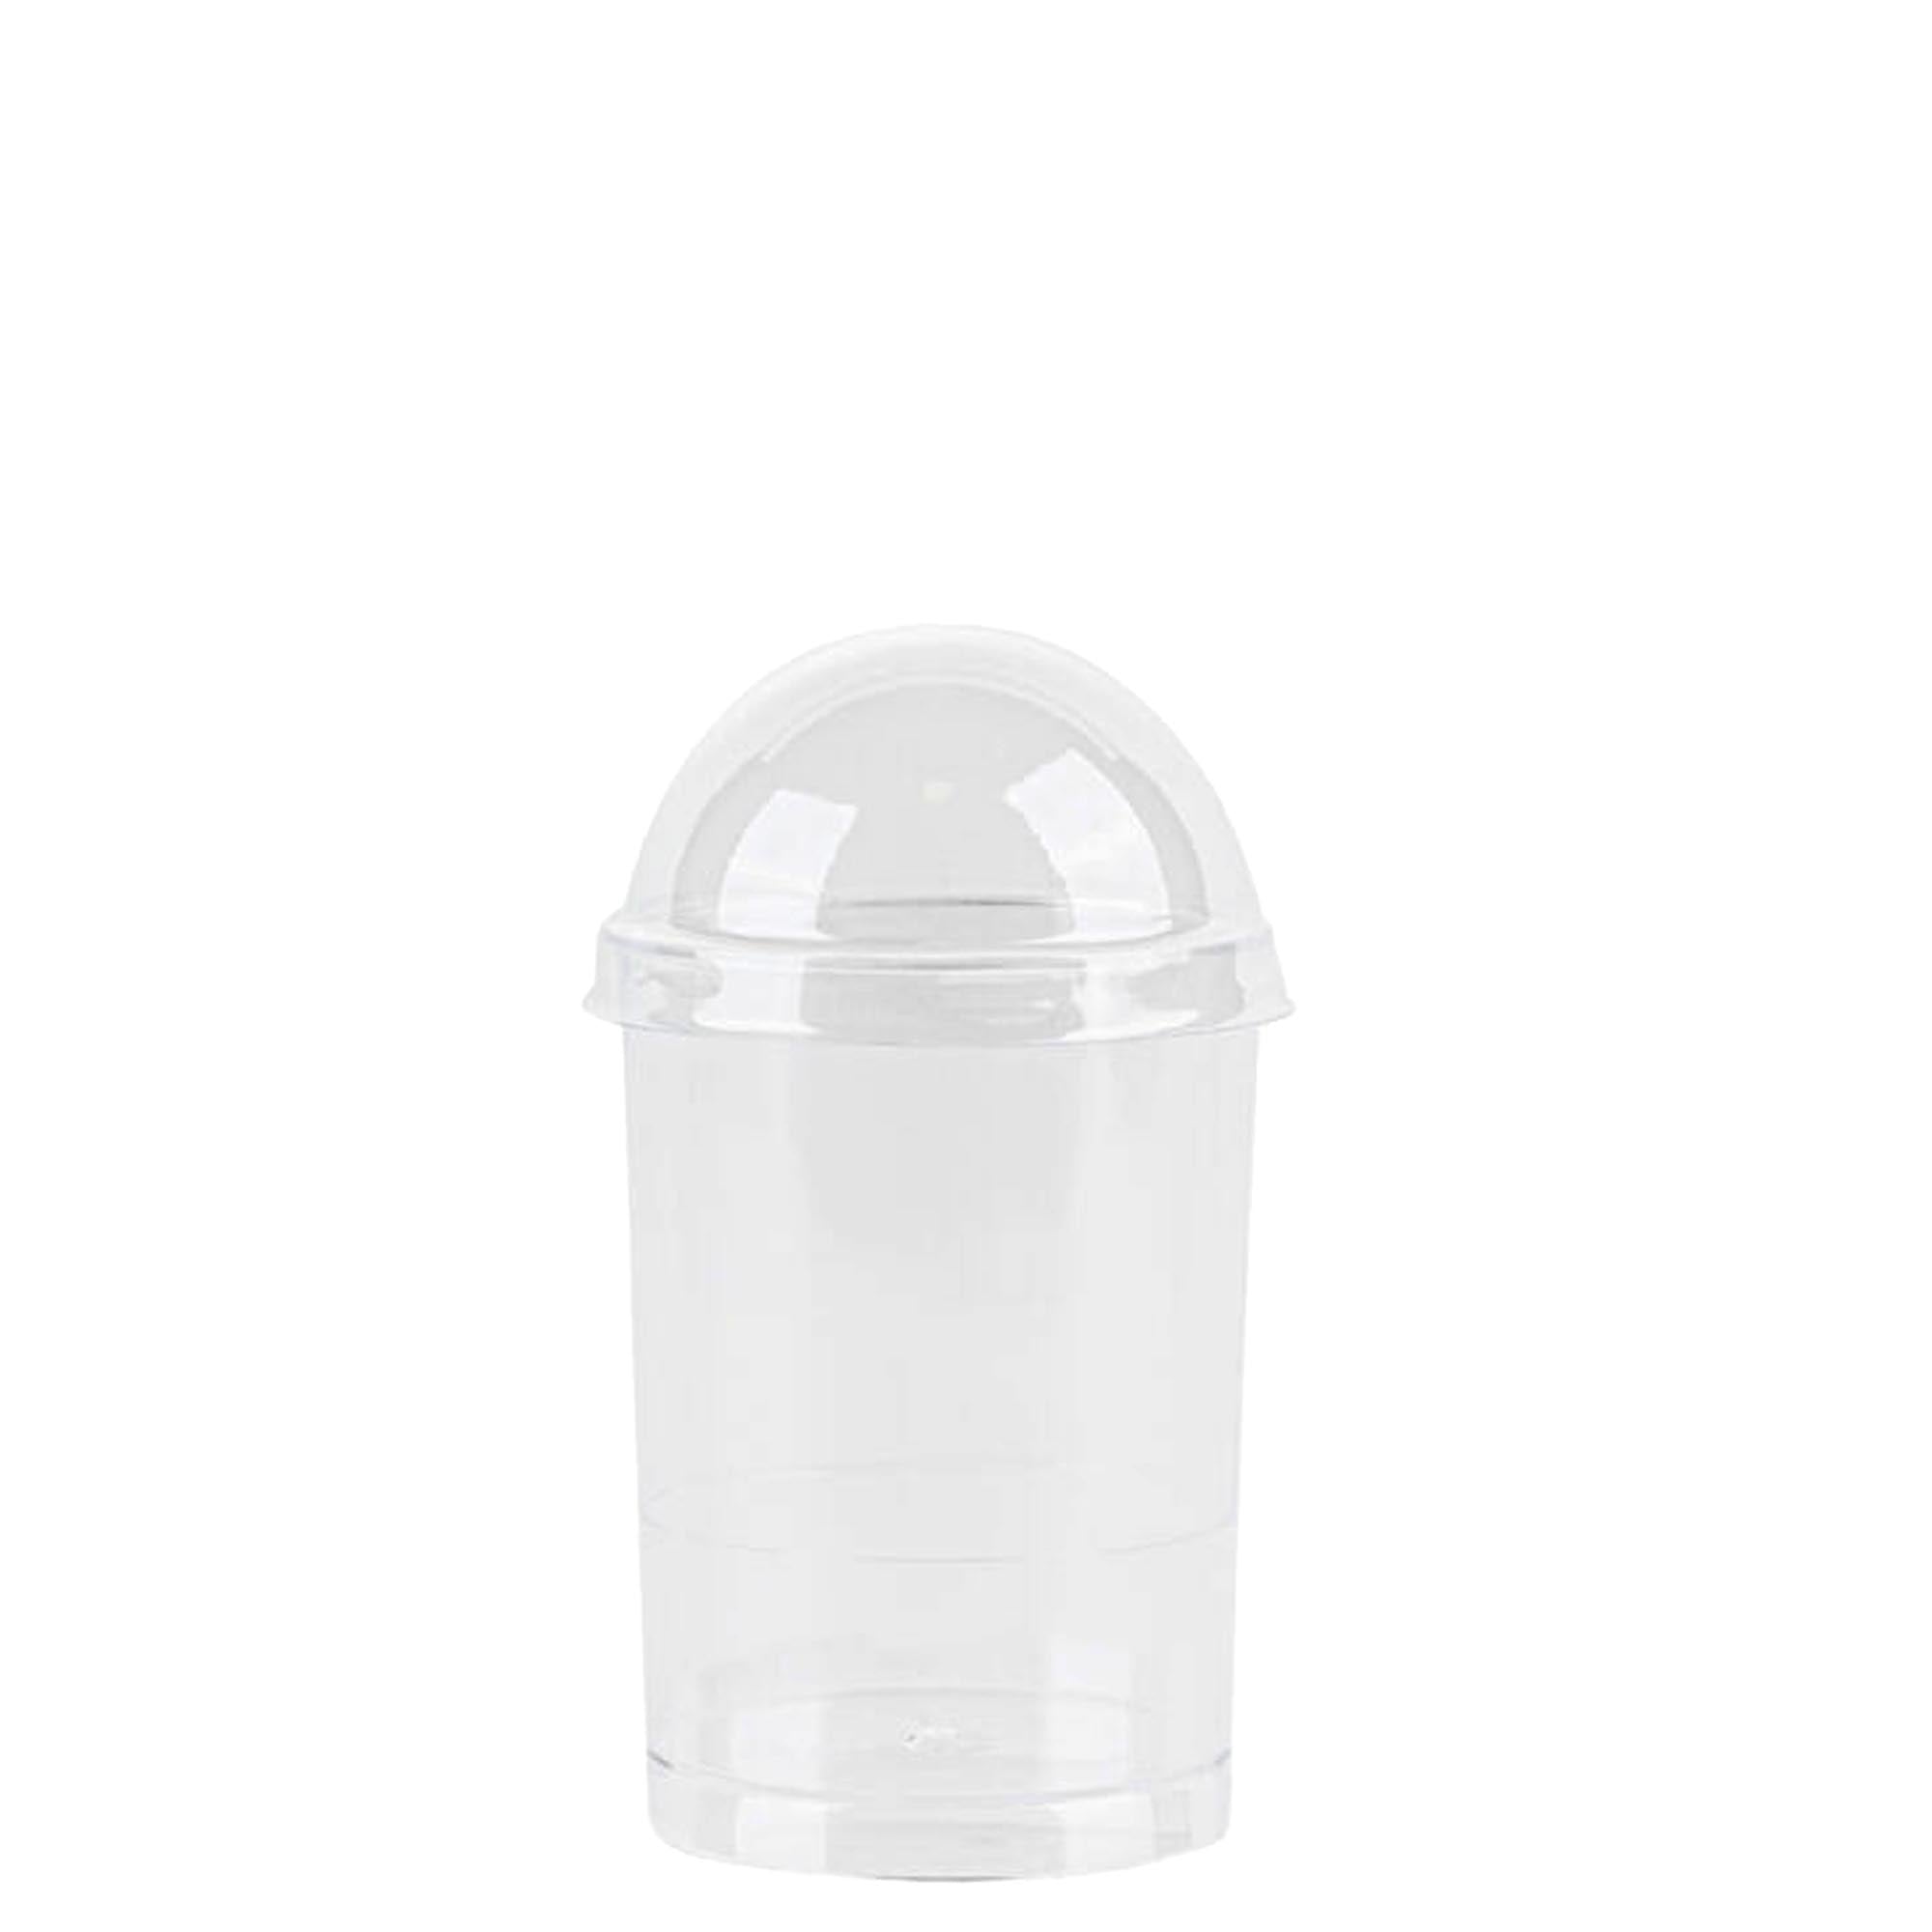 5oz Miniware Round Plastic Cups With Dome Lids